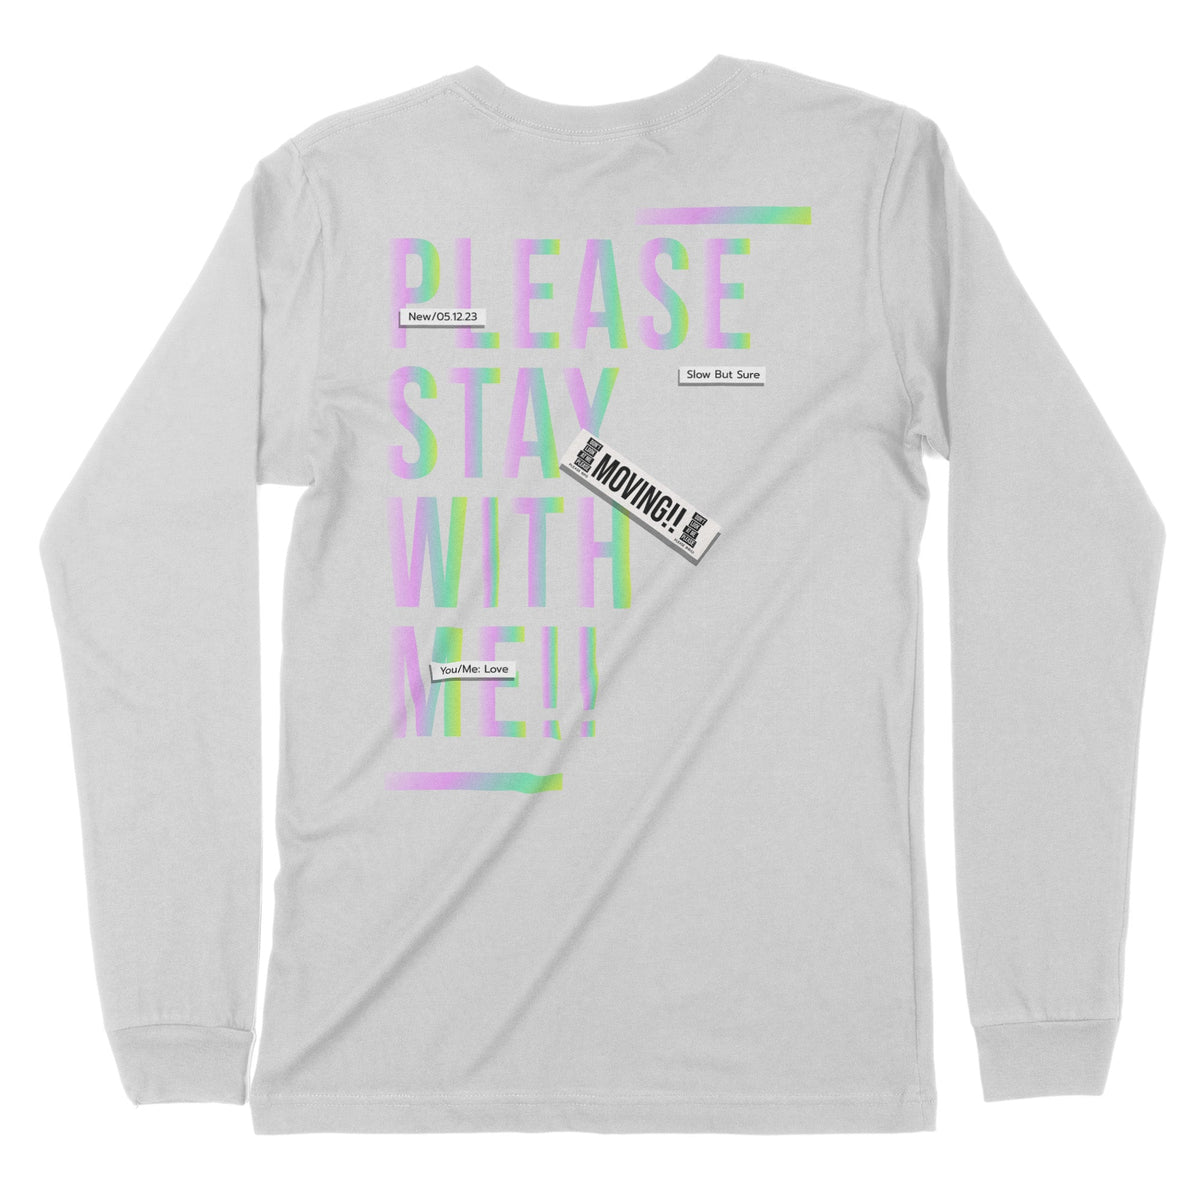 Stay With Me | Back Print | Long-Sleeve T-Shirt | Premium Quality Stre Chroma Clothing